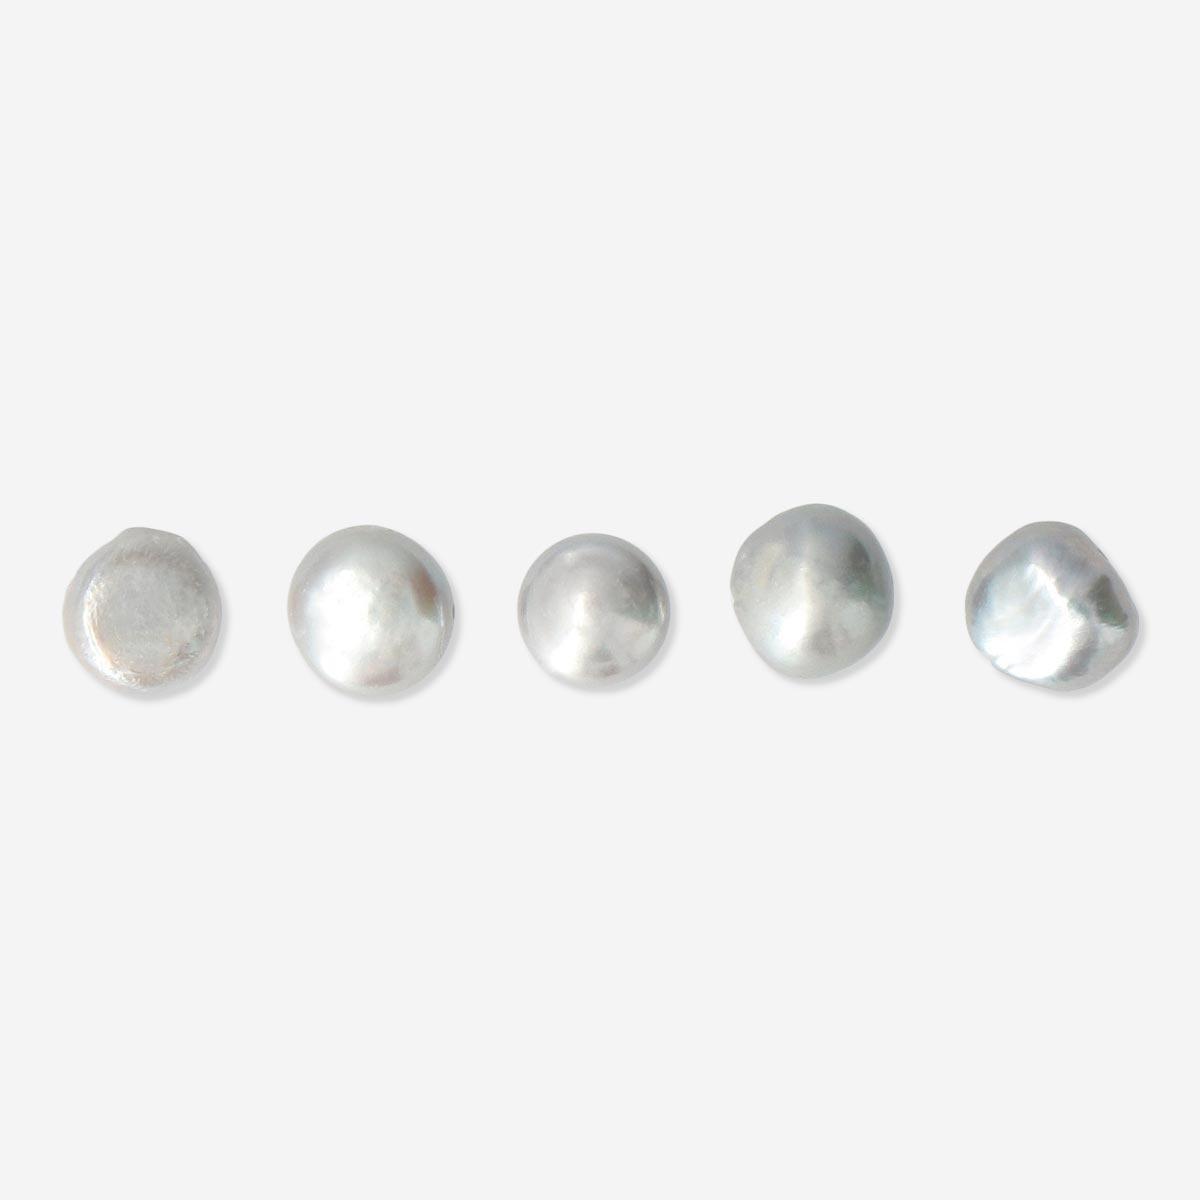 Silver freshwater pearls. 5 pcs